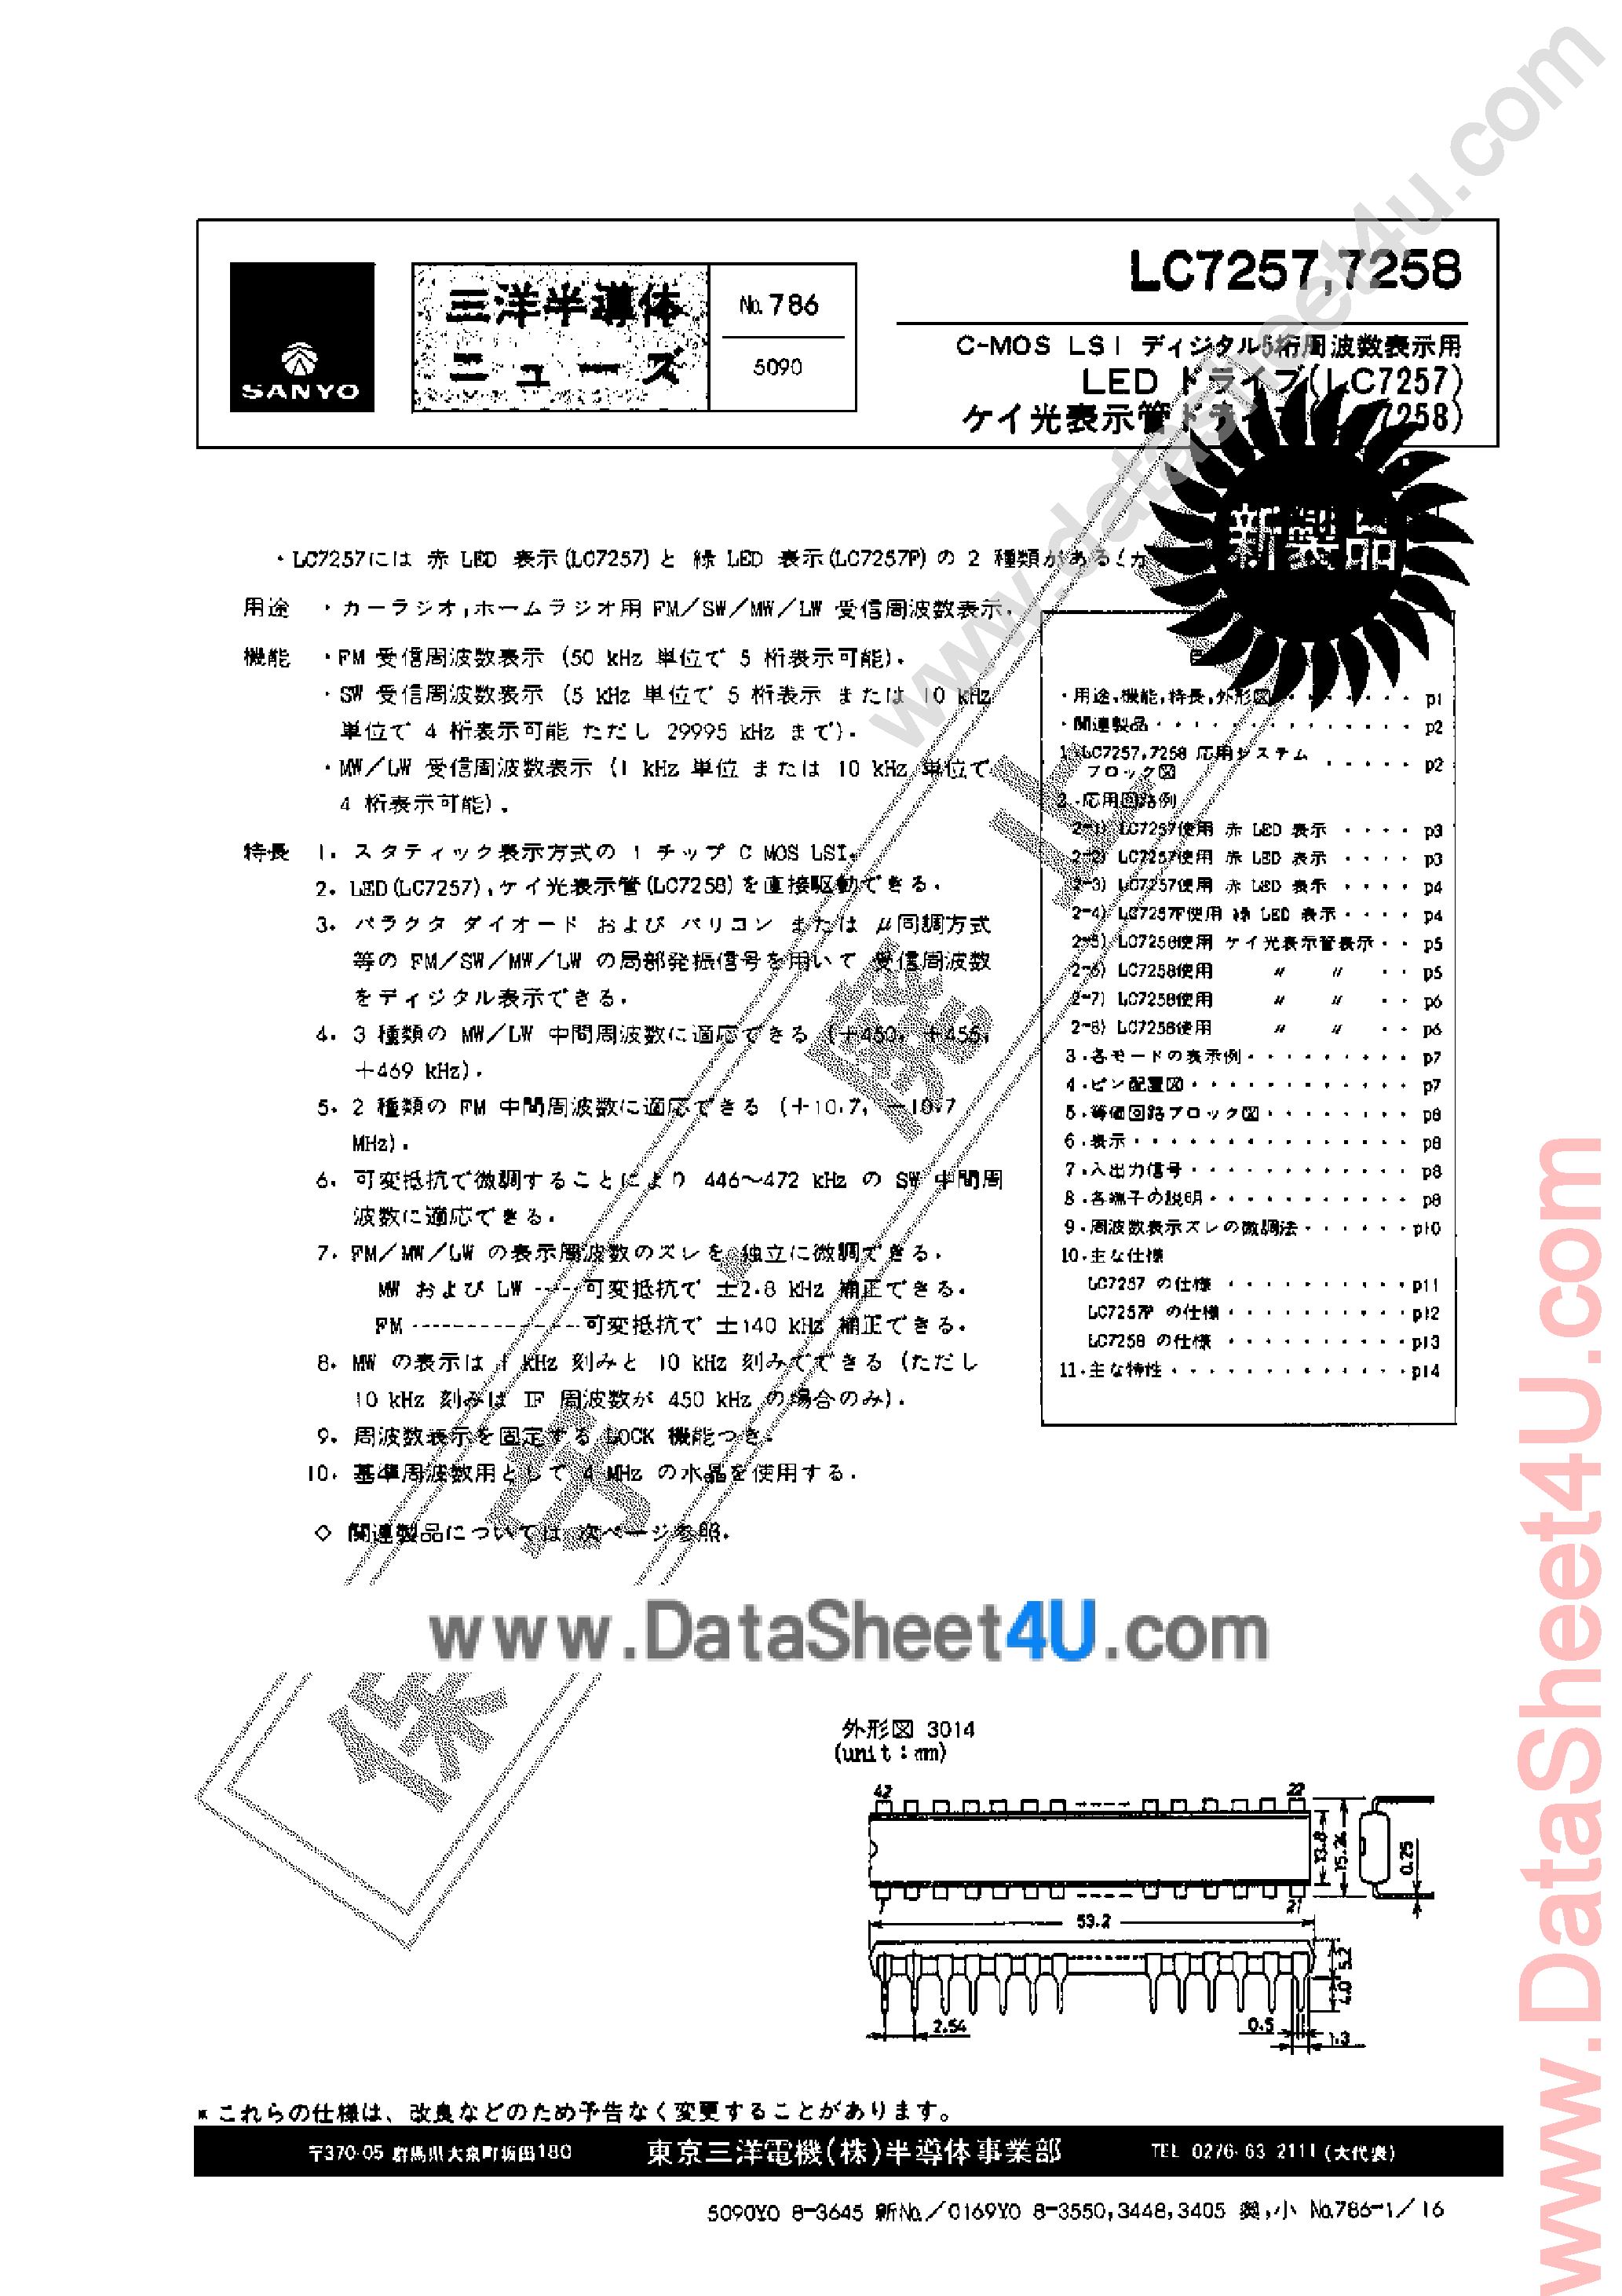 Datasheet LC7257 - (LC7257 / LC7258) CMOS LED page 1